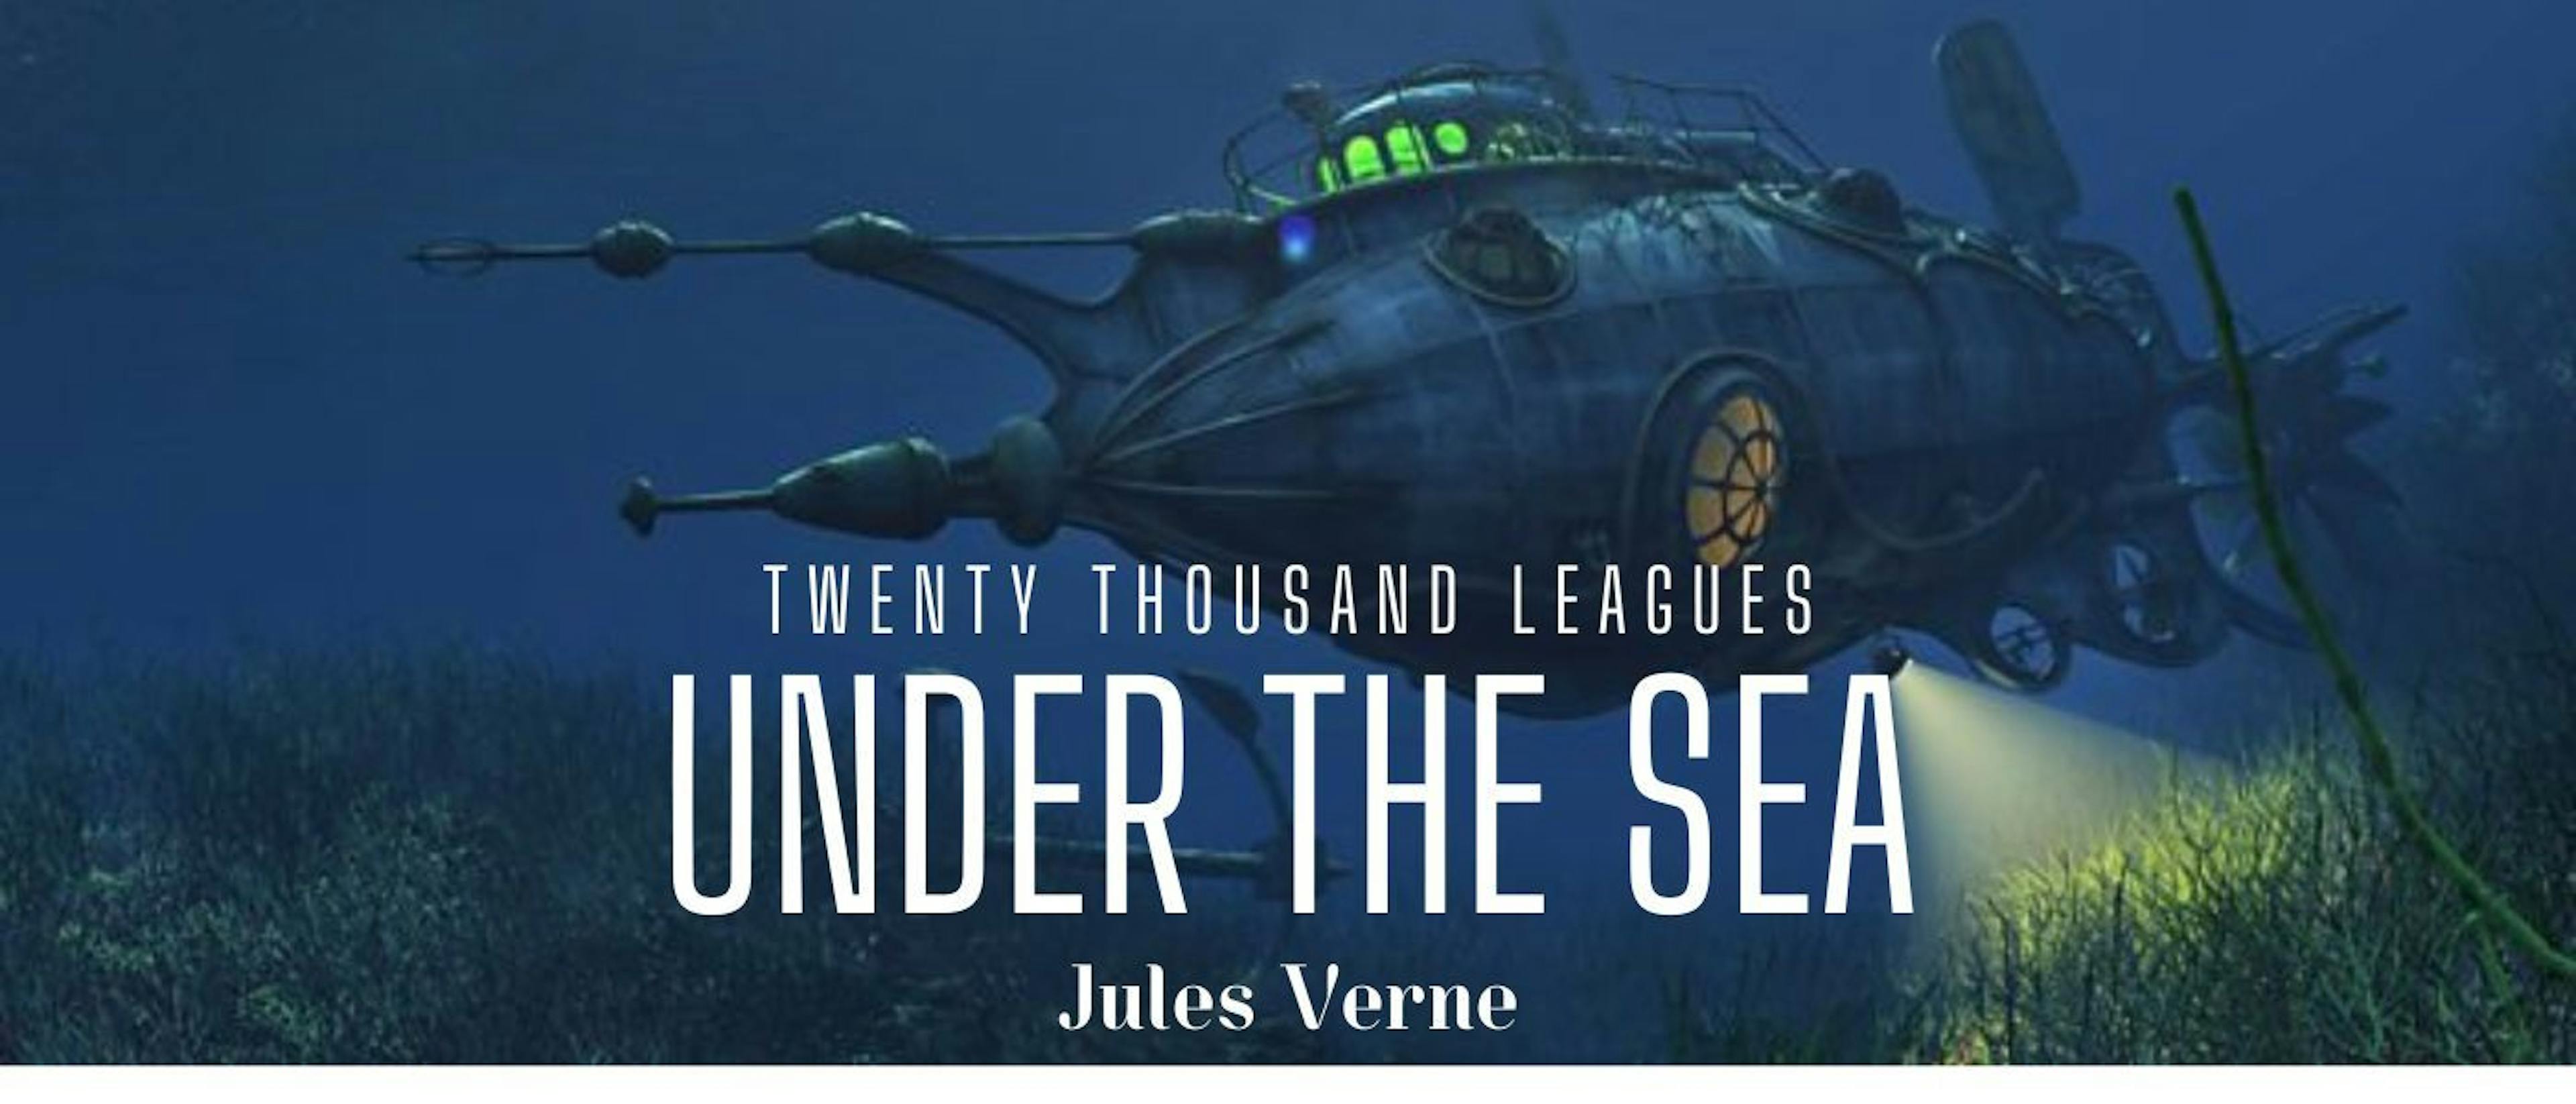 featured image - Ends the voyage under the seas